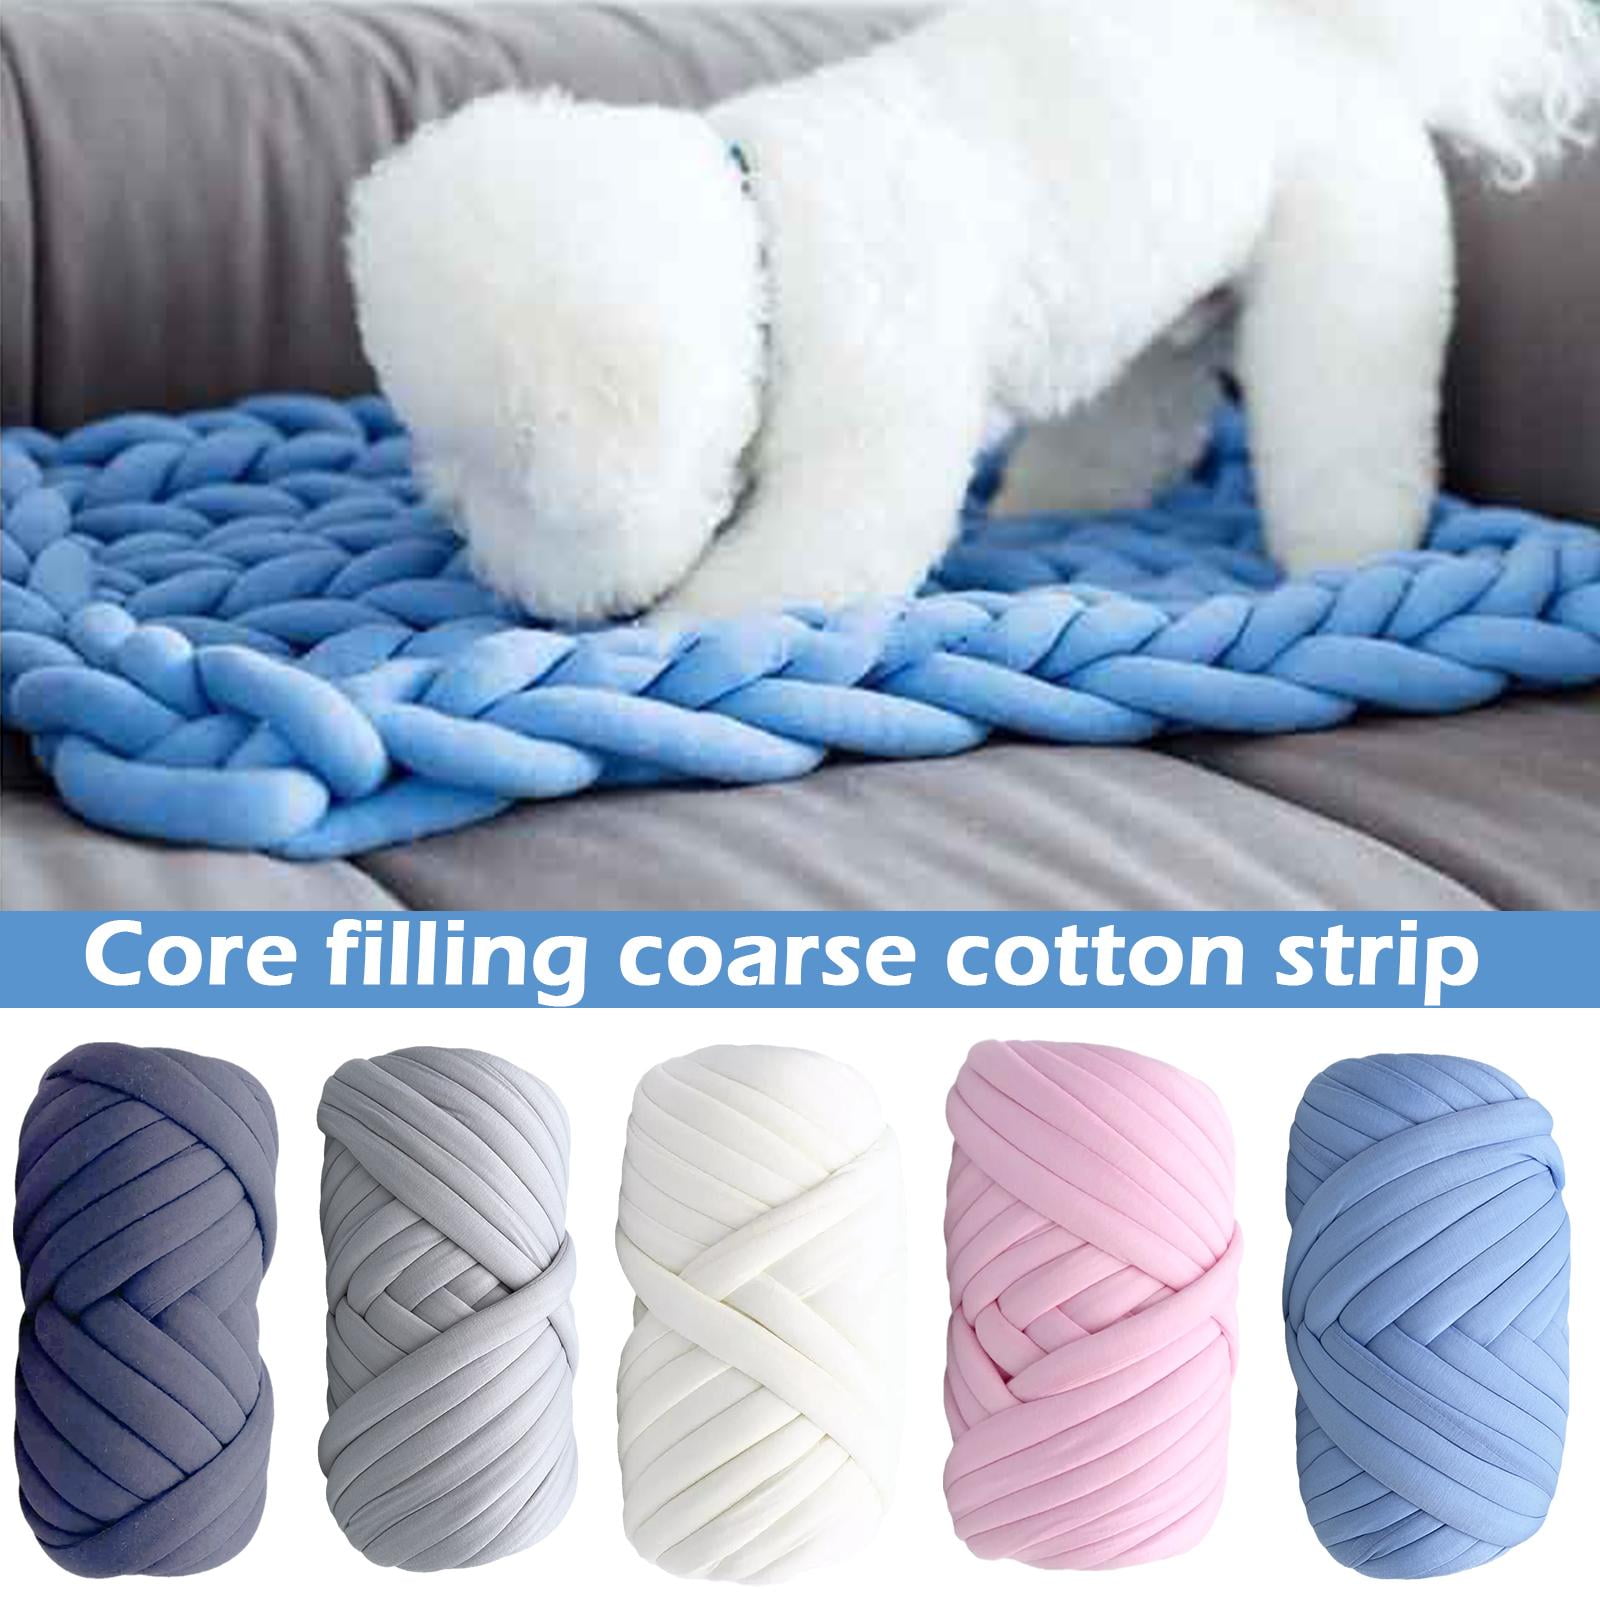 Arm Knitting Yarn for Chunky Braided Knot Throw Blanket DIY, Soft Extra Cotton Washable Tube Bulky Giant Yarn for Weave Craft Crochet (Navy Blue